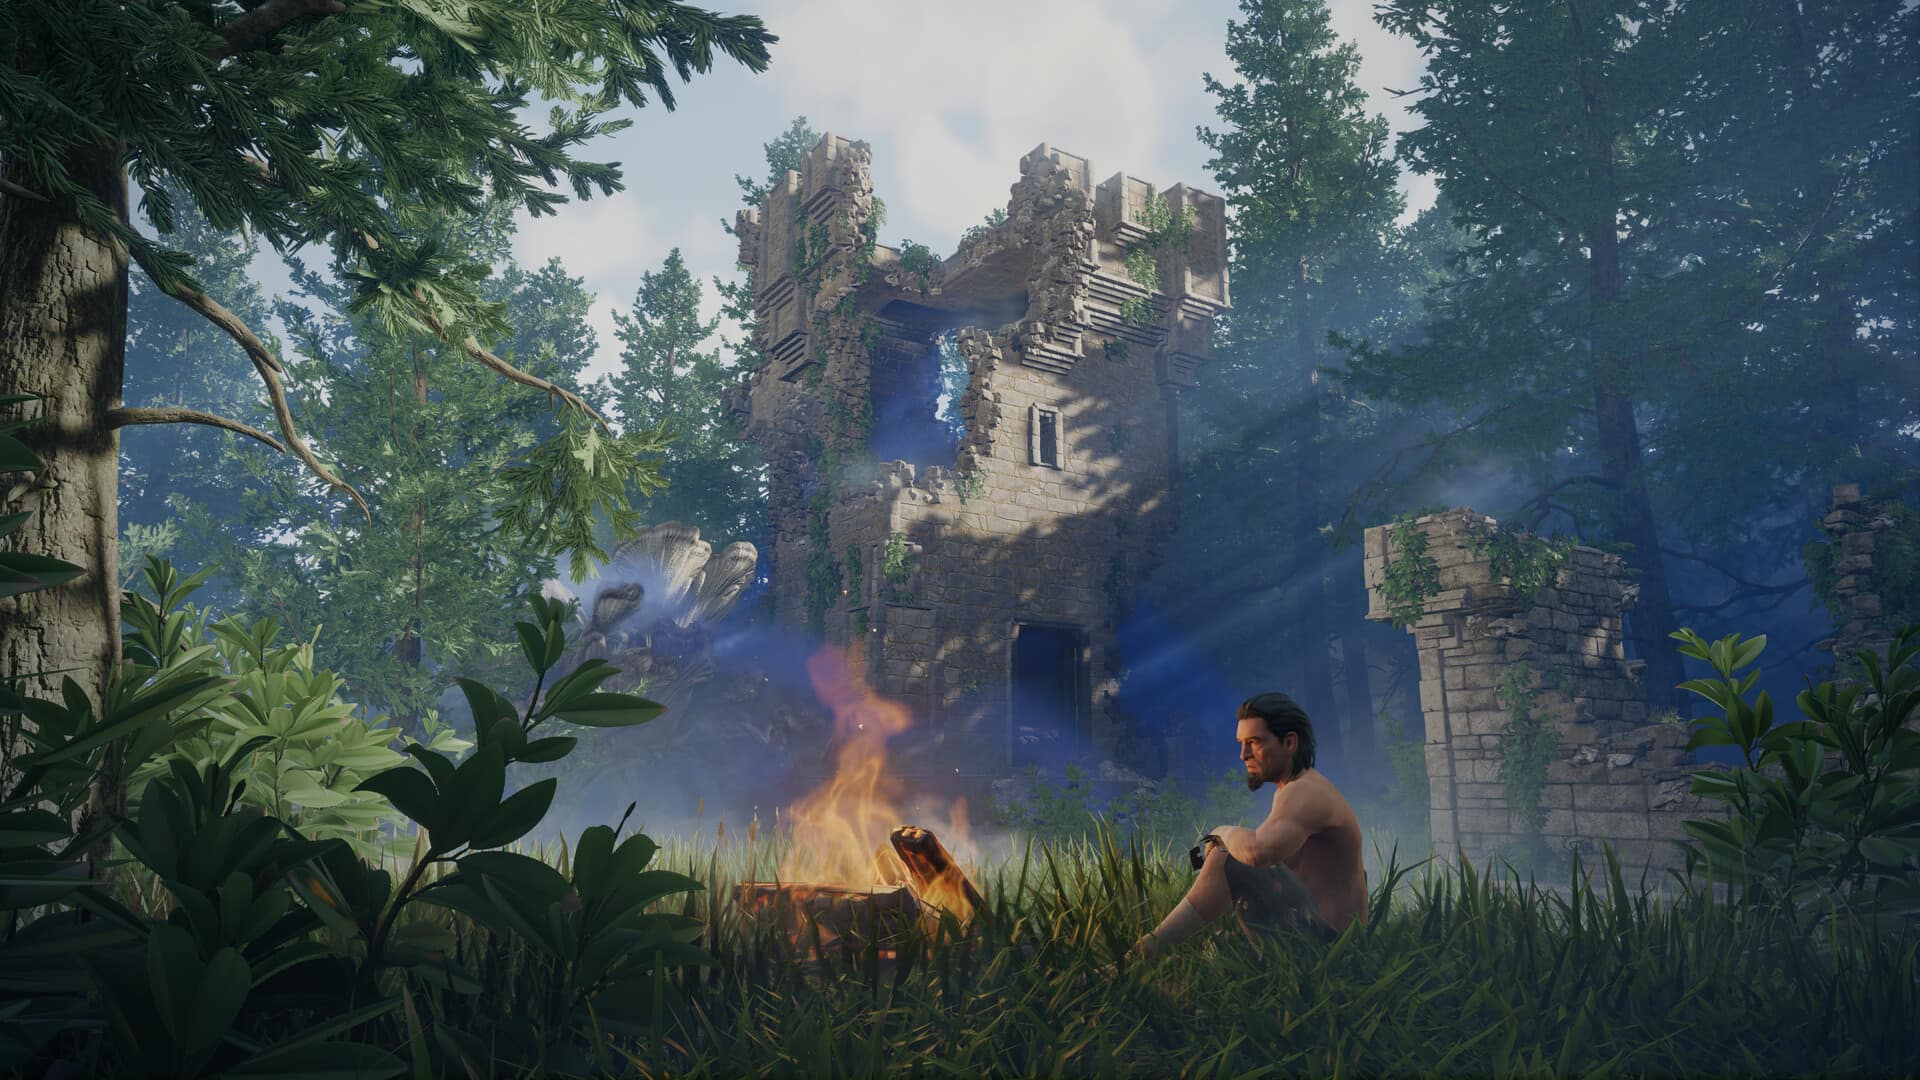 Enshrouded patch notes: character resting by a campfire with ruins in the background.